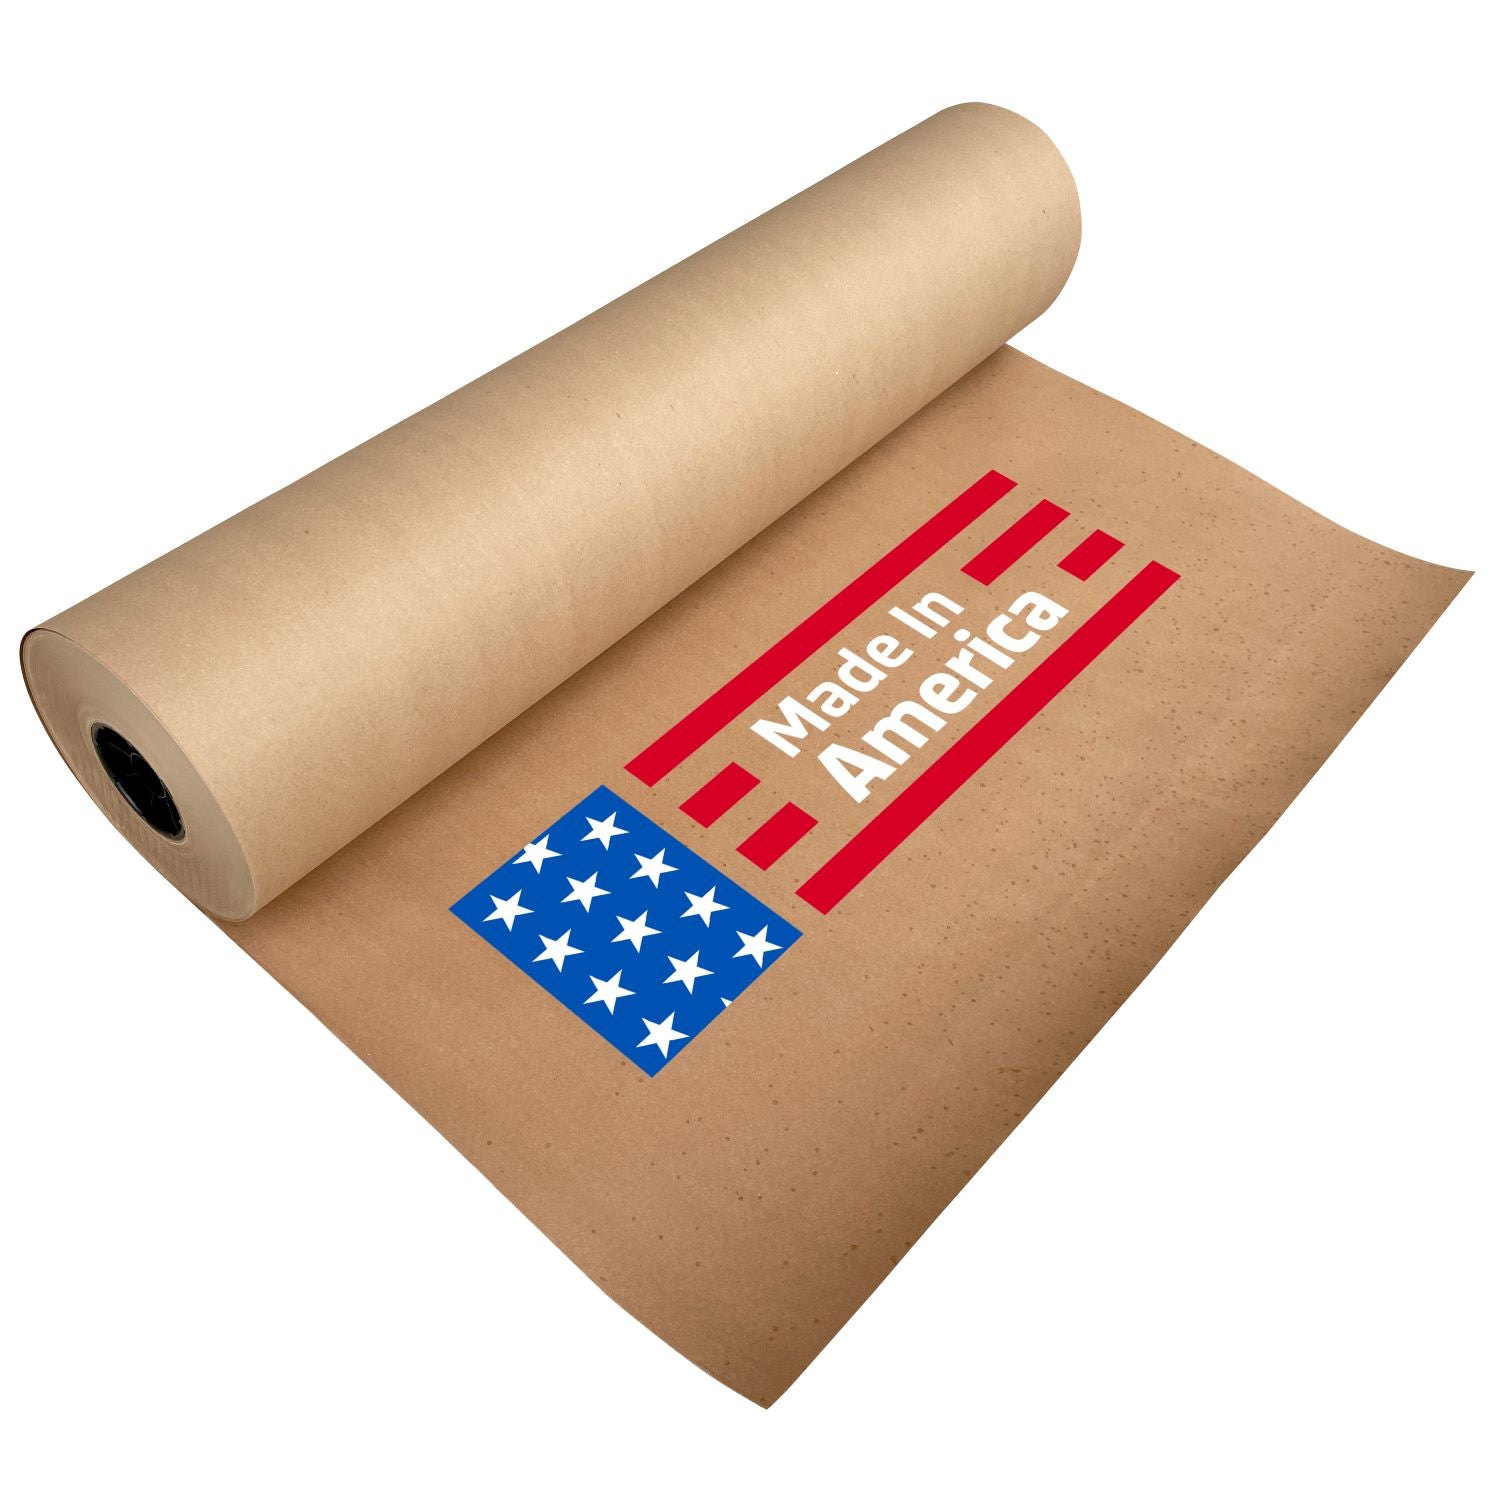 Brown Kraft Paper Roll 24 Inch X 165 Feet Recycled Paper, 43% OFF